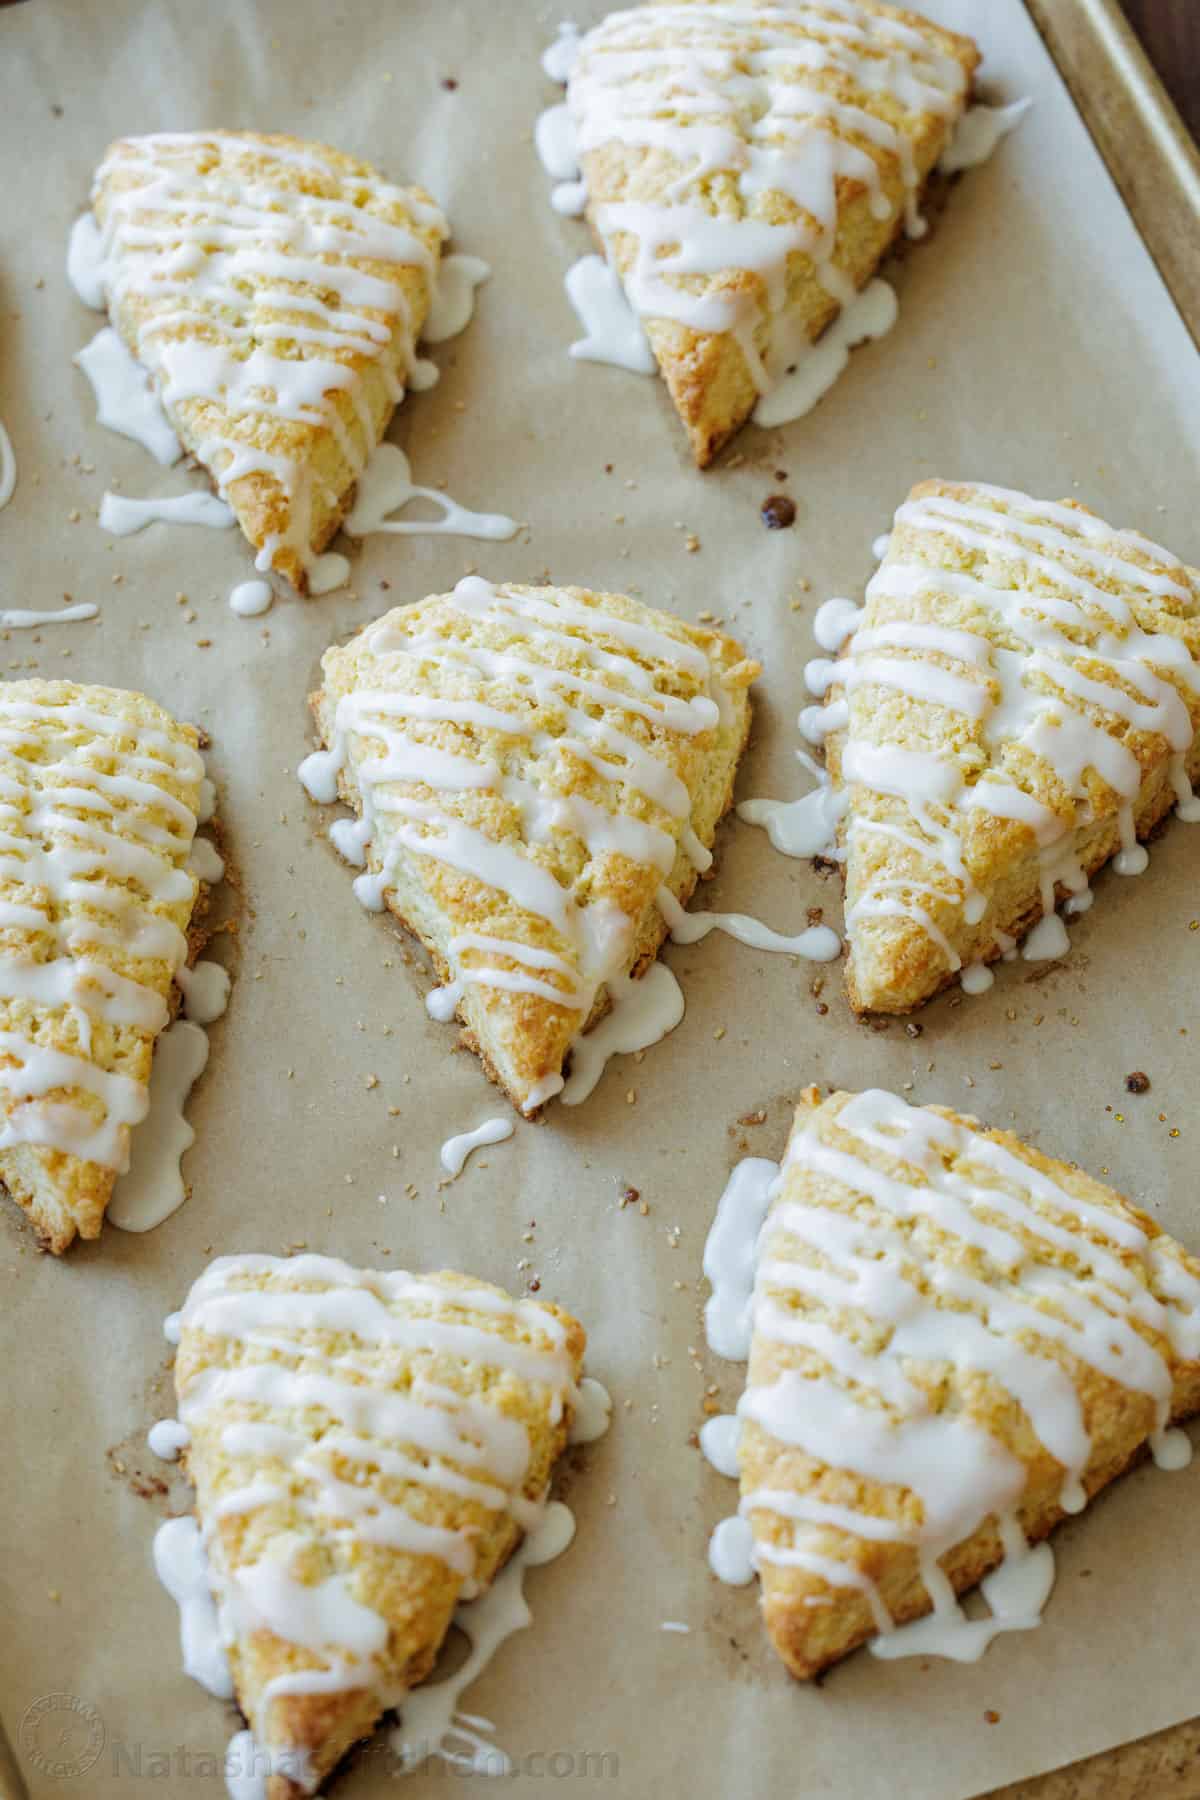 English scone wedges drizzled with vanilla glaze